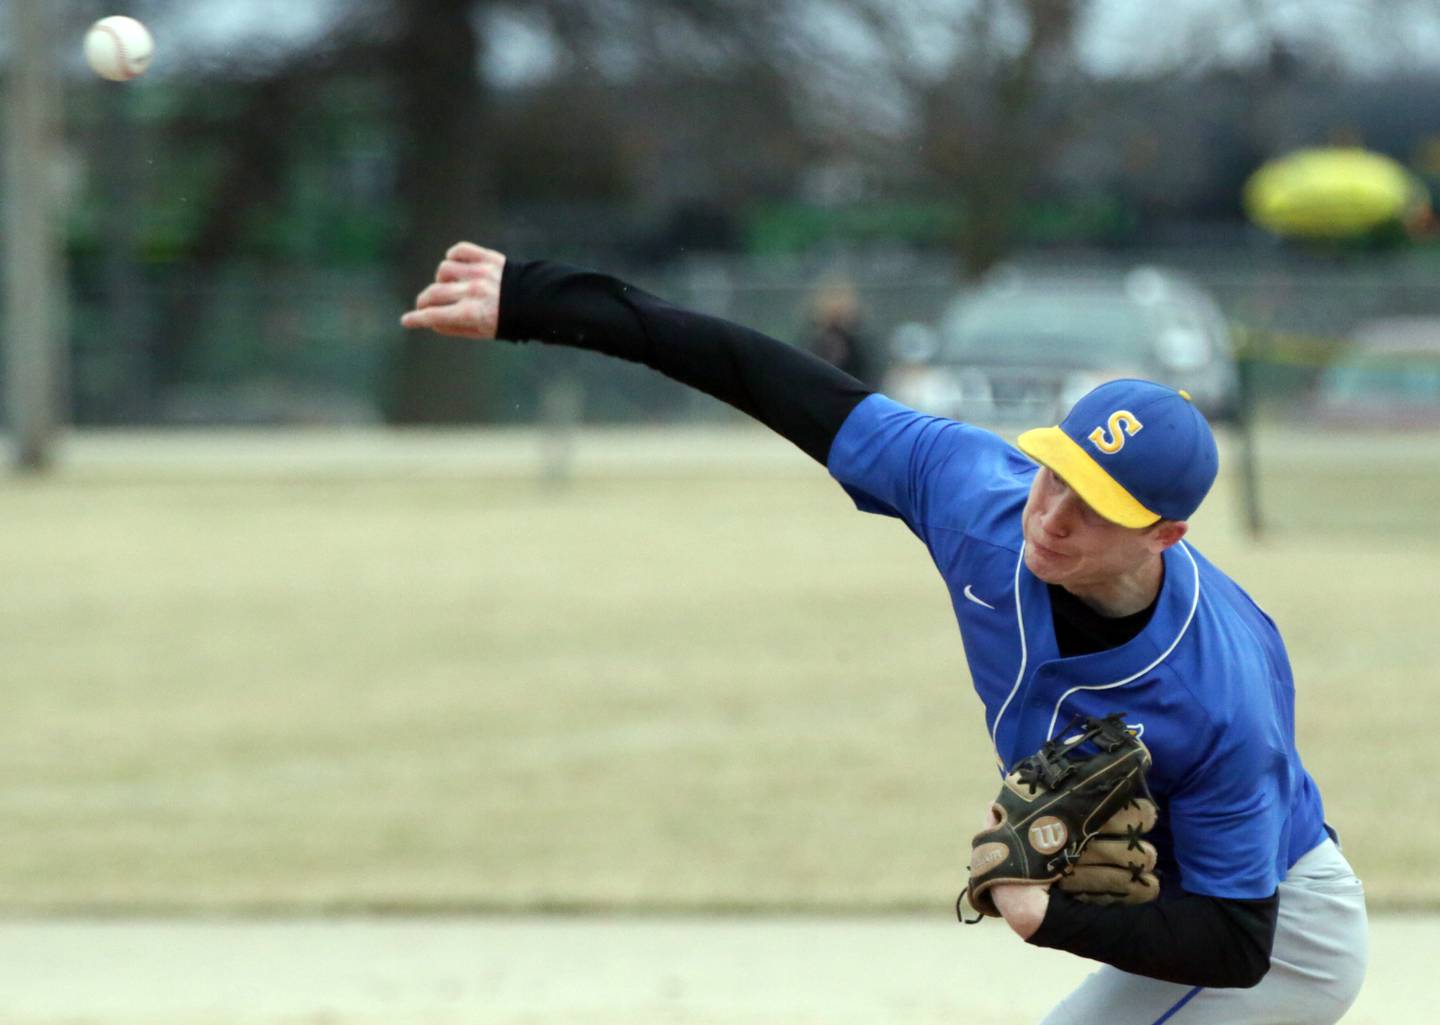 Somonauk's Brendan Roberts (24) delivers a pitch to Putnam County on Tuesday, March 22, 2022 in Somonauk. Roberts struck out 14 Panthers and allowed just one hit and two walks in six innings of work, but suffered the loss.